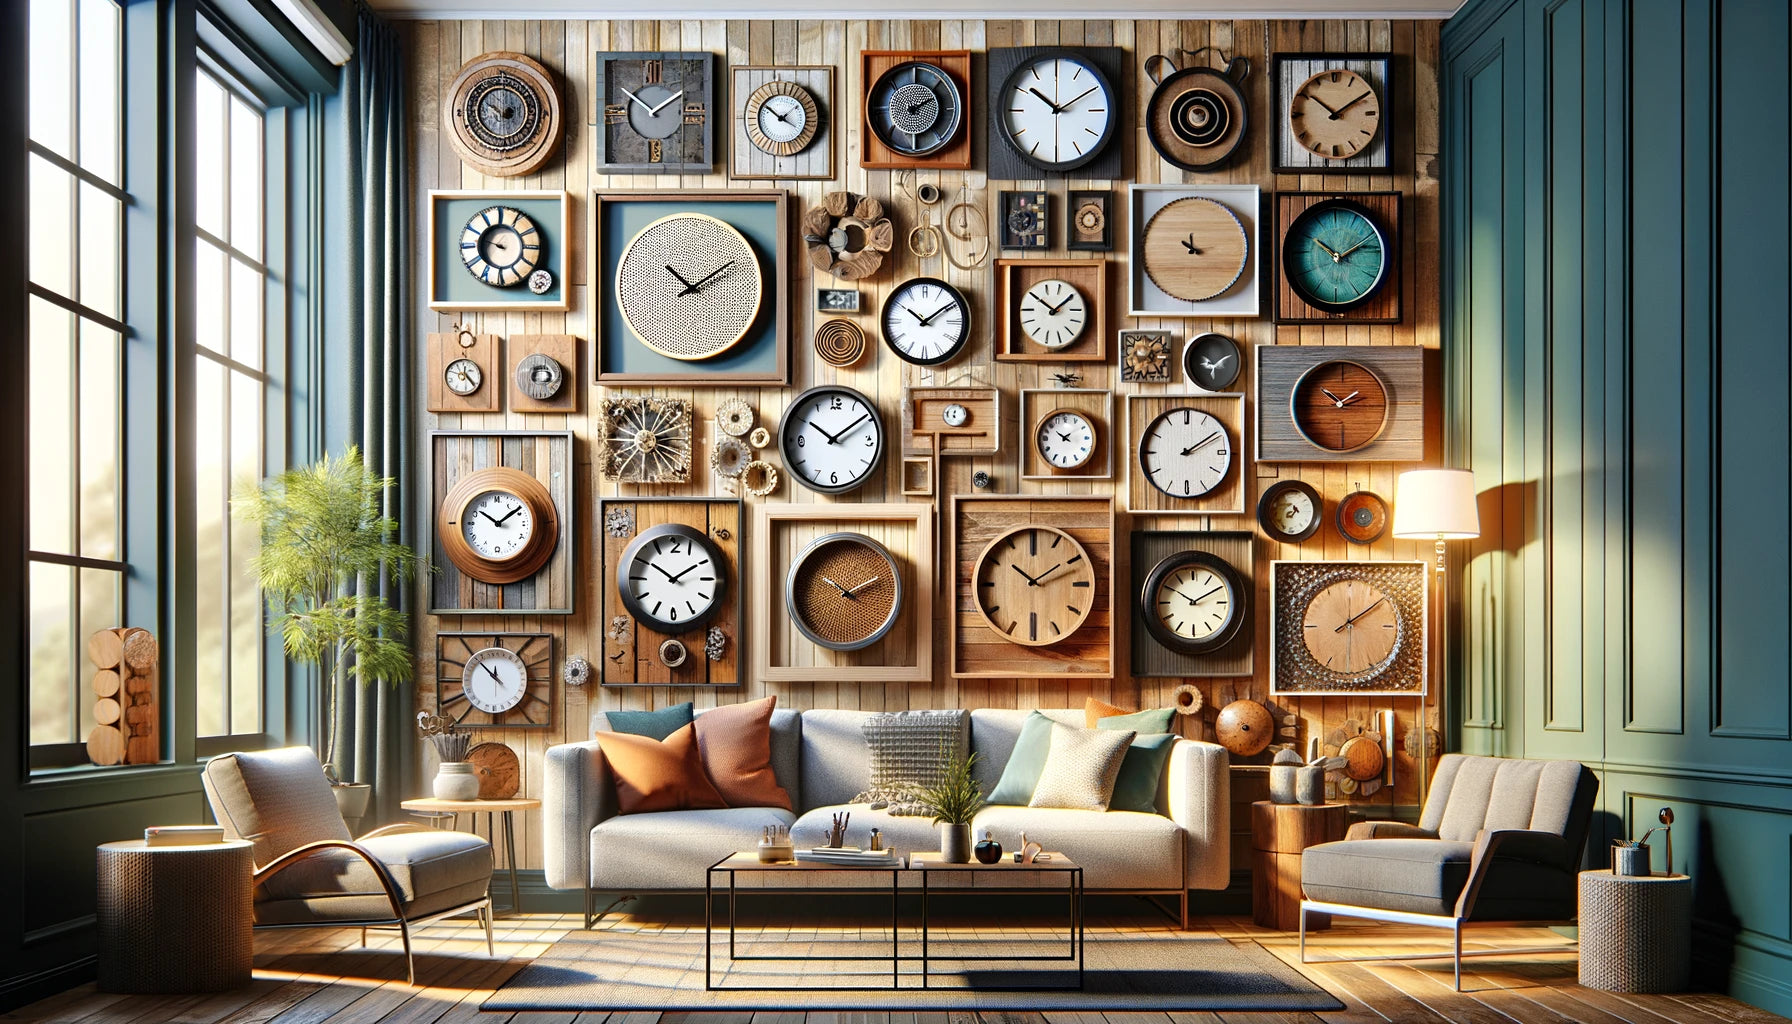 How to choose a quiet wall clock for your home?